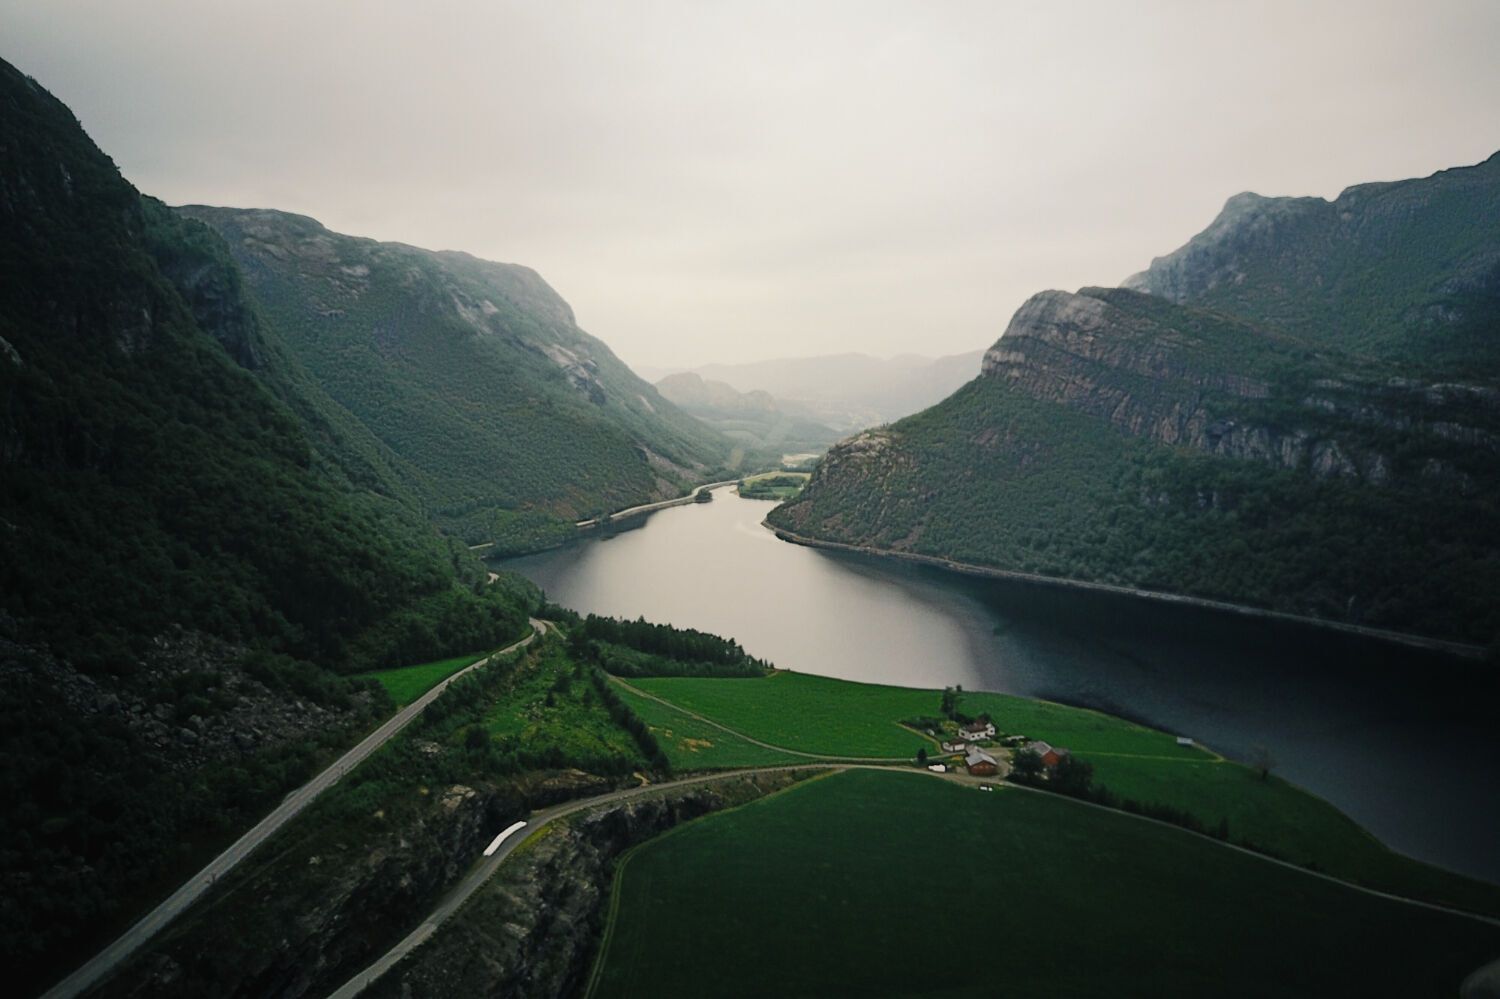 The charm of all seasons: How to choose the perfect time to visit Norway